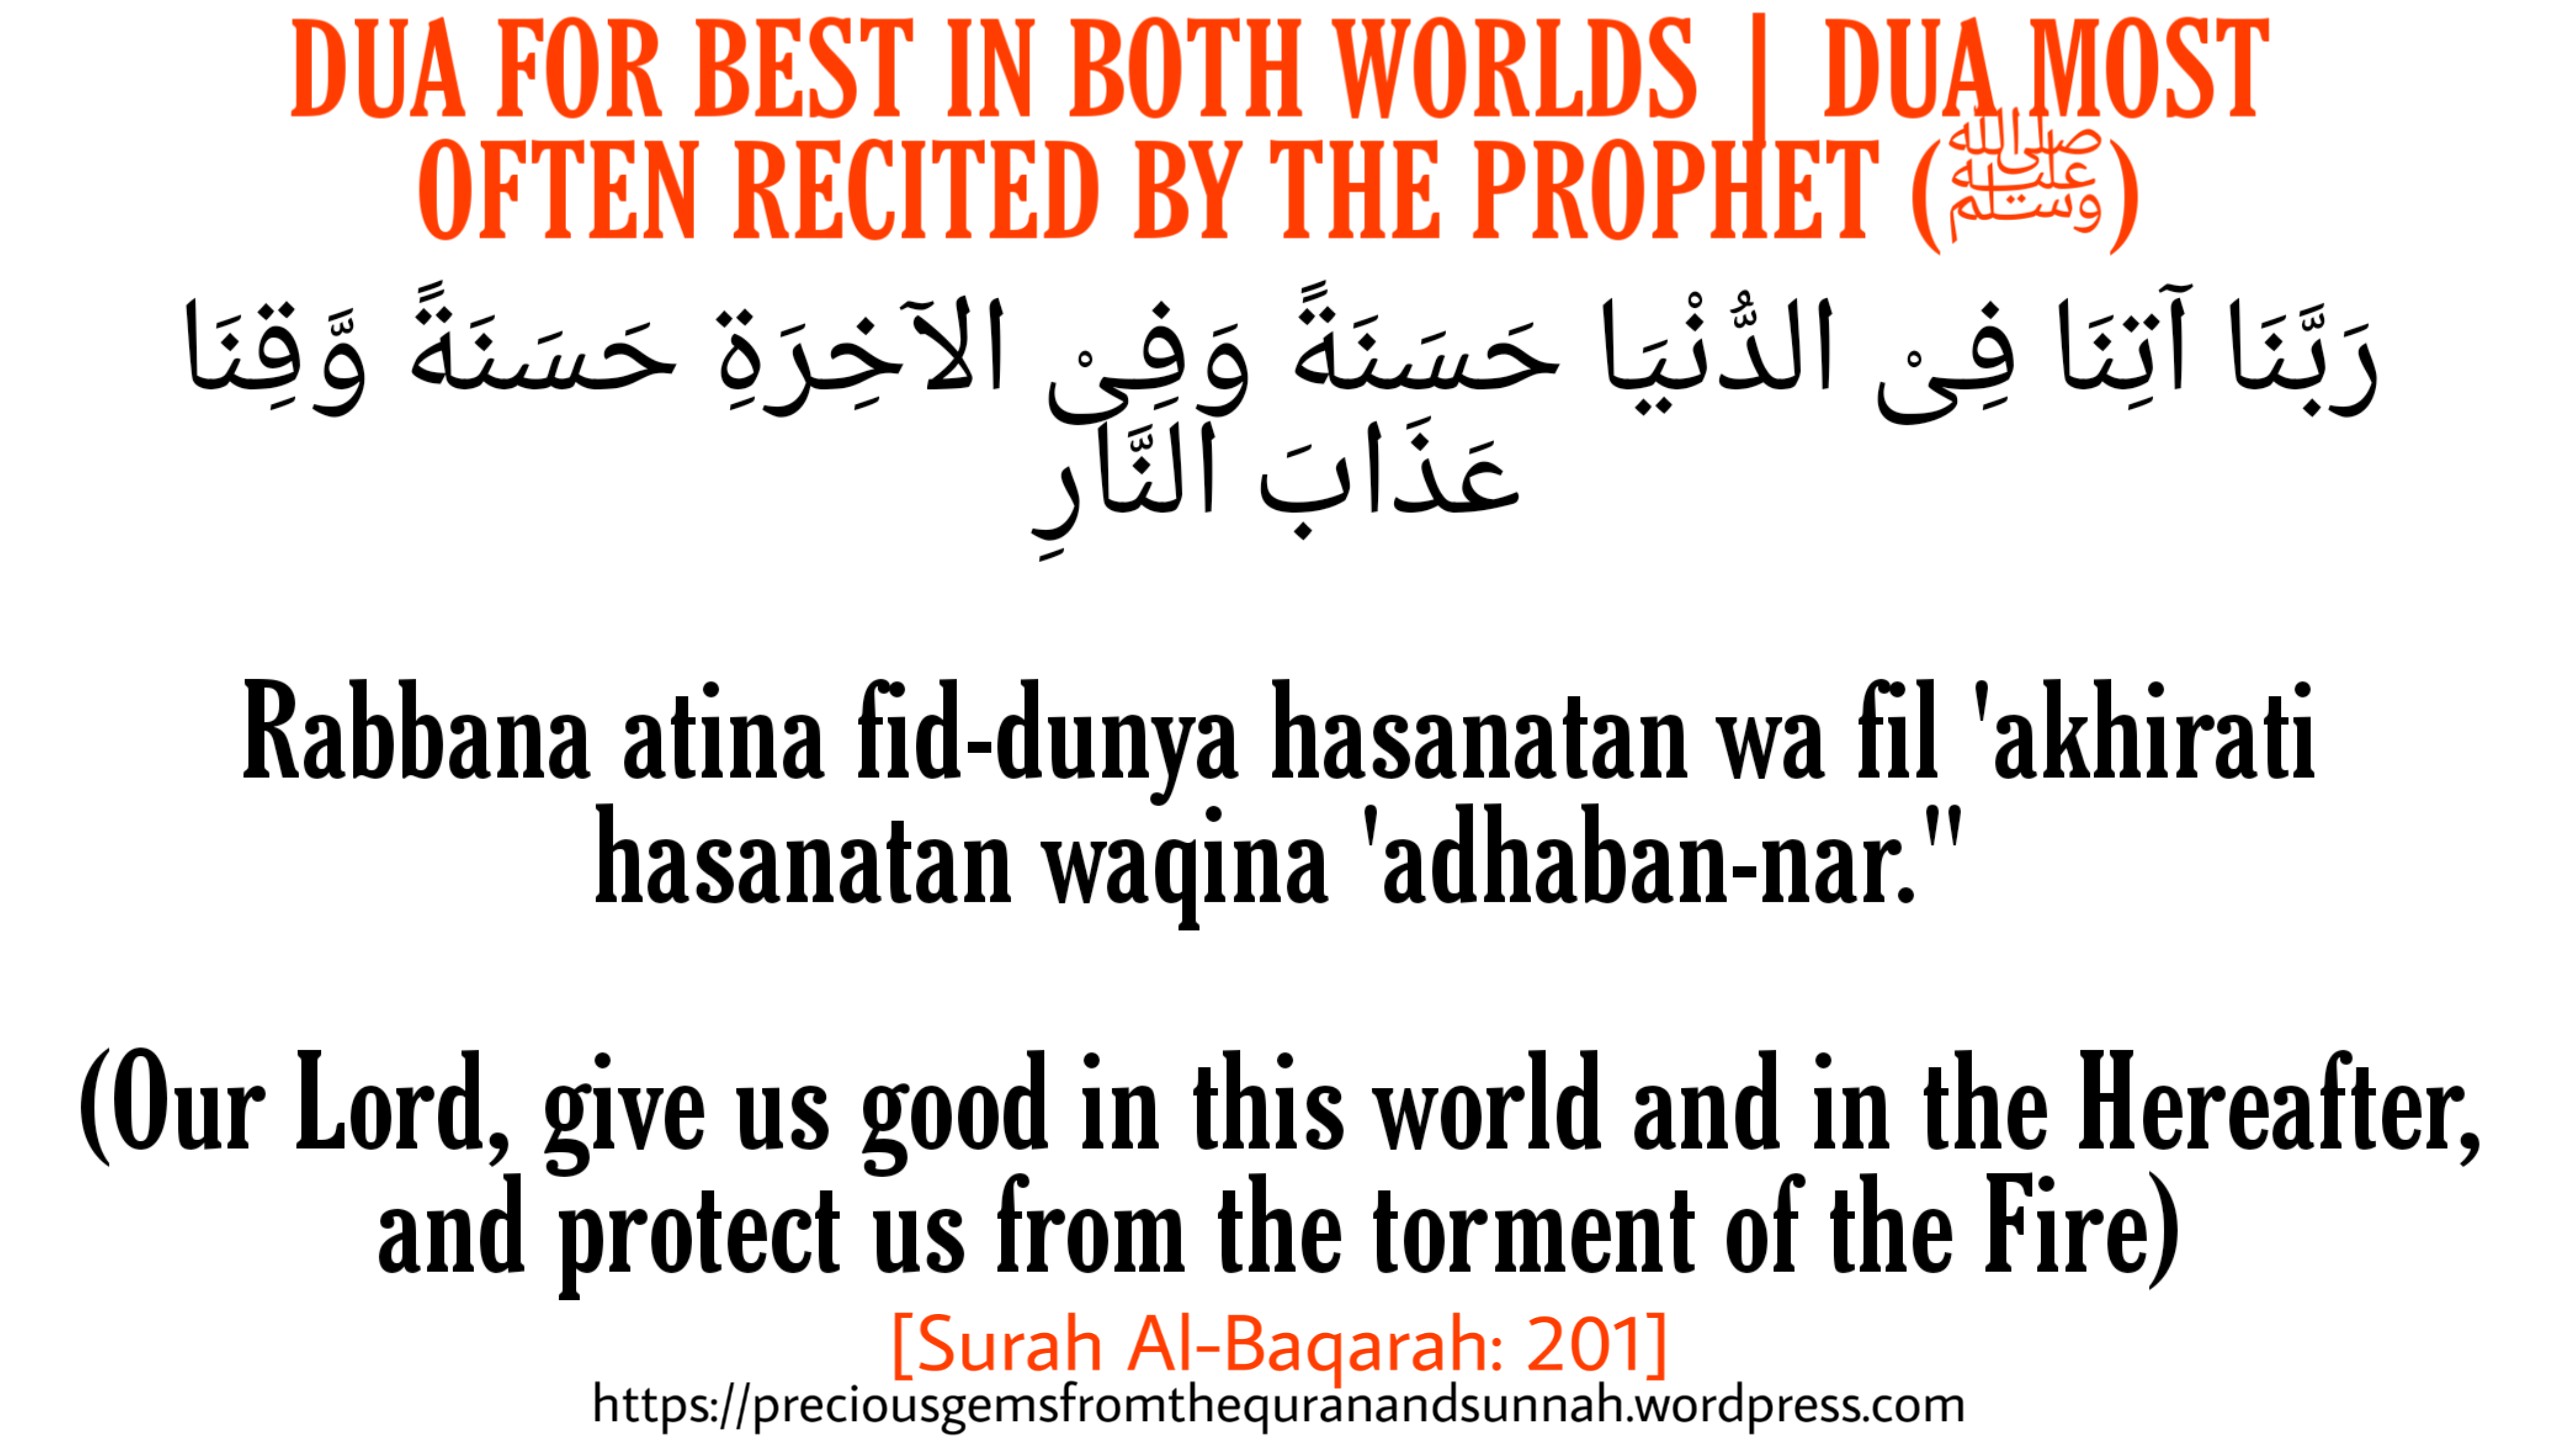 DUA FOR BEST IN BOTH WORLDS  DUA MOST OFTEN RECITED BY THE